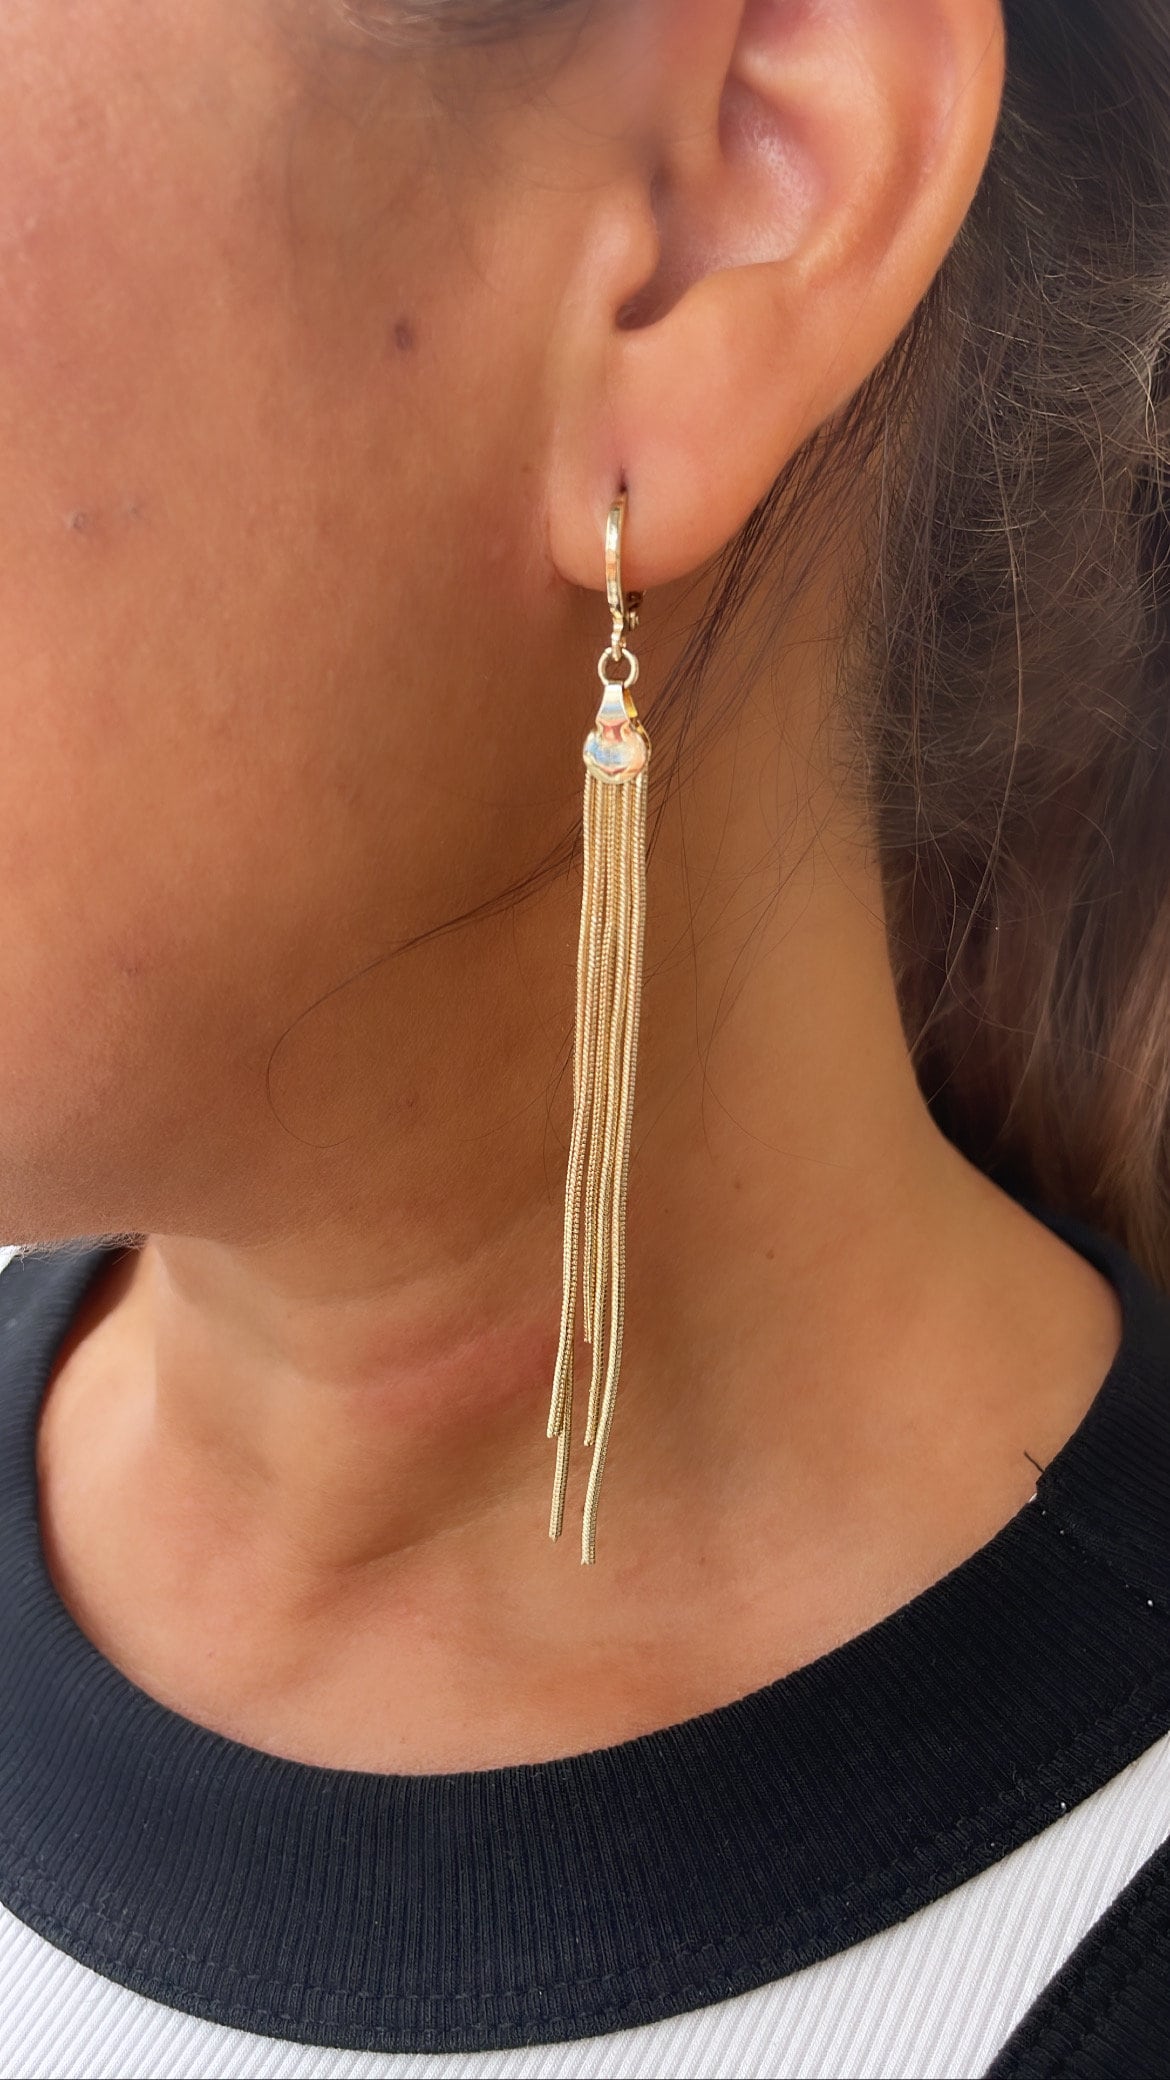 18k Gold Filled Dangling earring with Individual Cable Chain Links